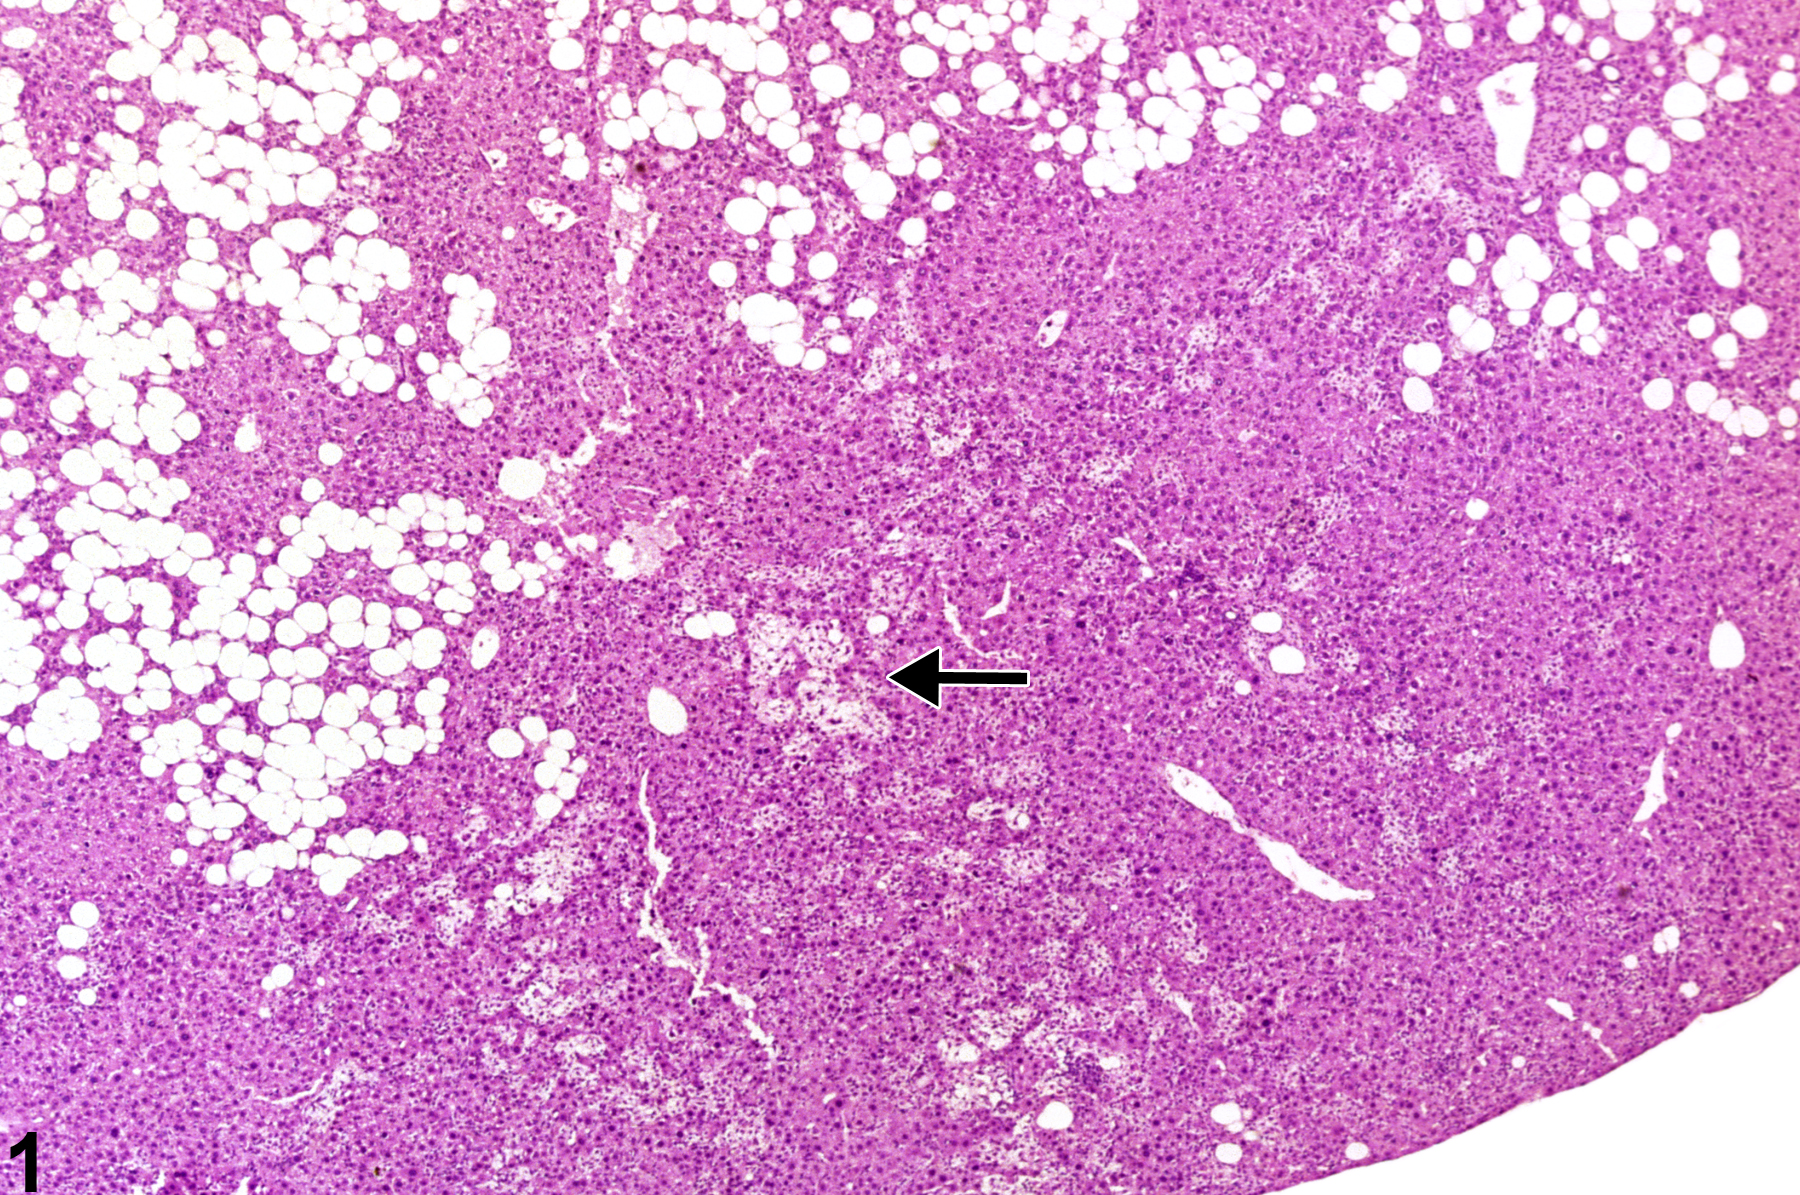 Image of hyperplasia in the liver from a female B6C3F1 mouse in a chronic study